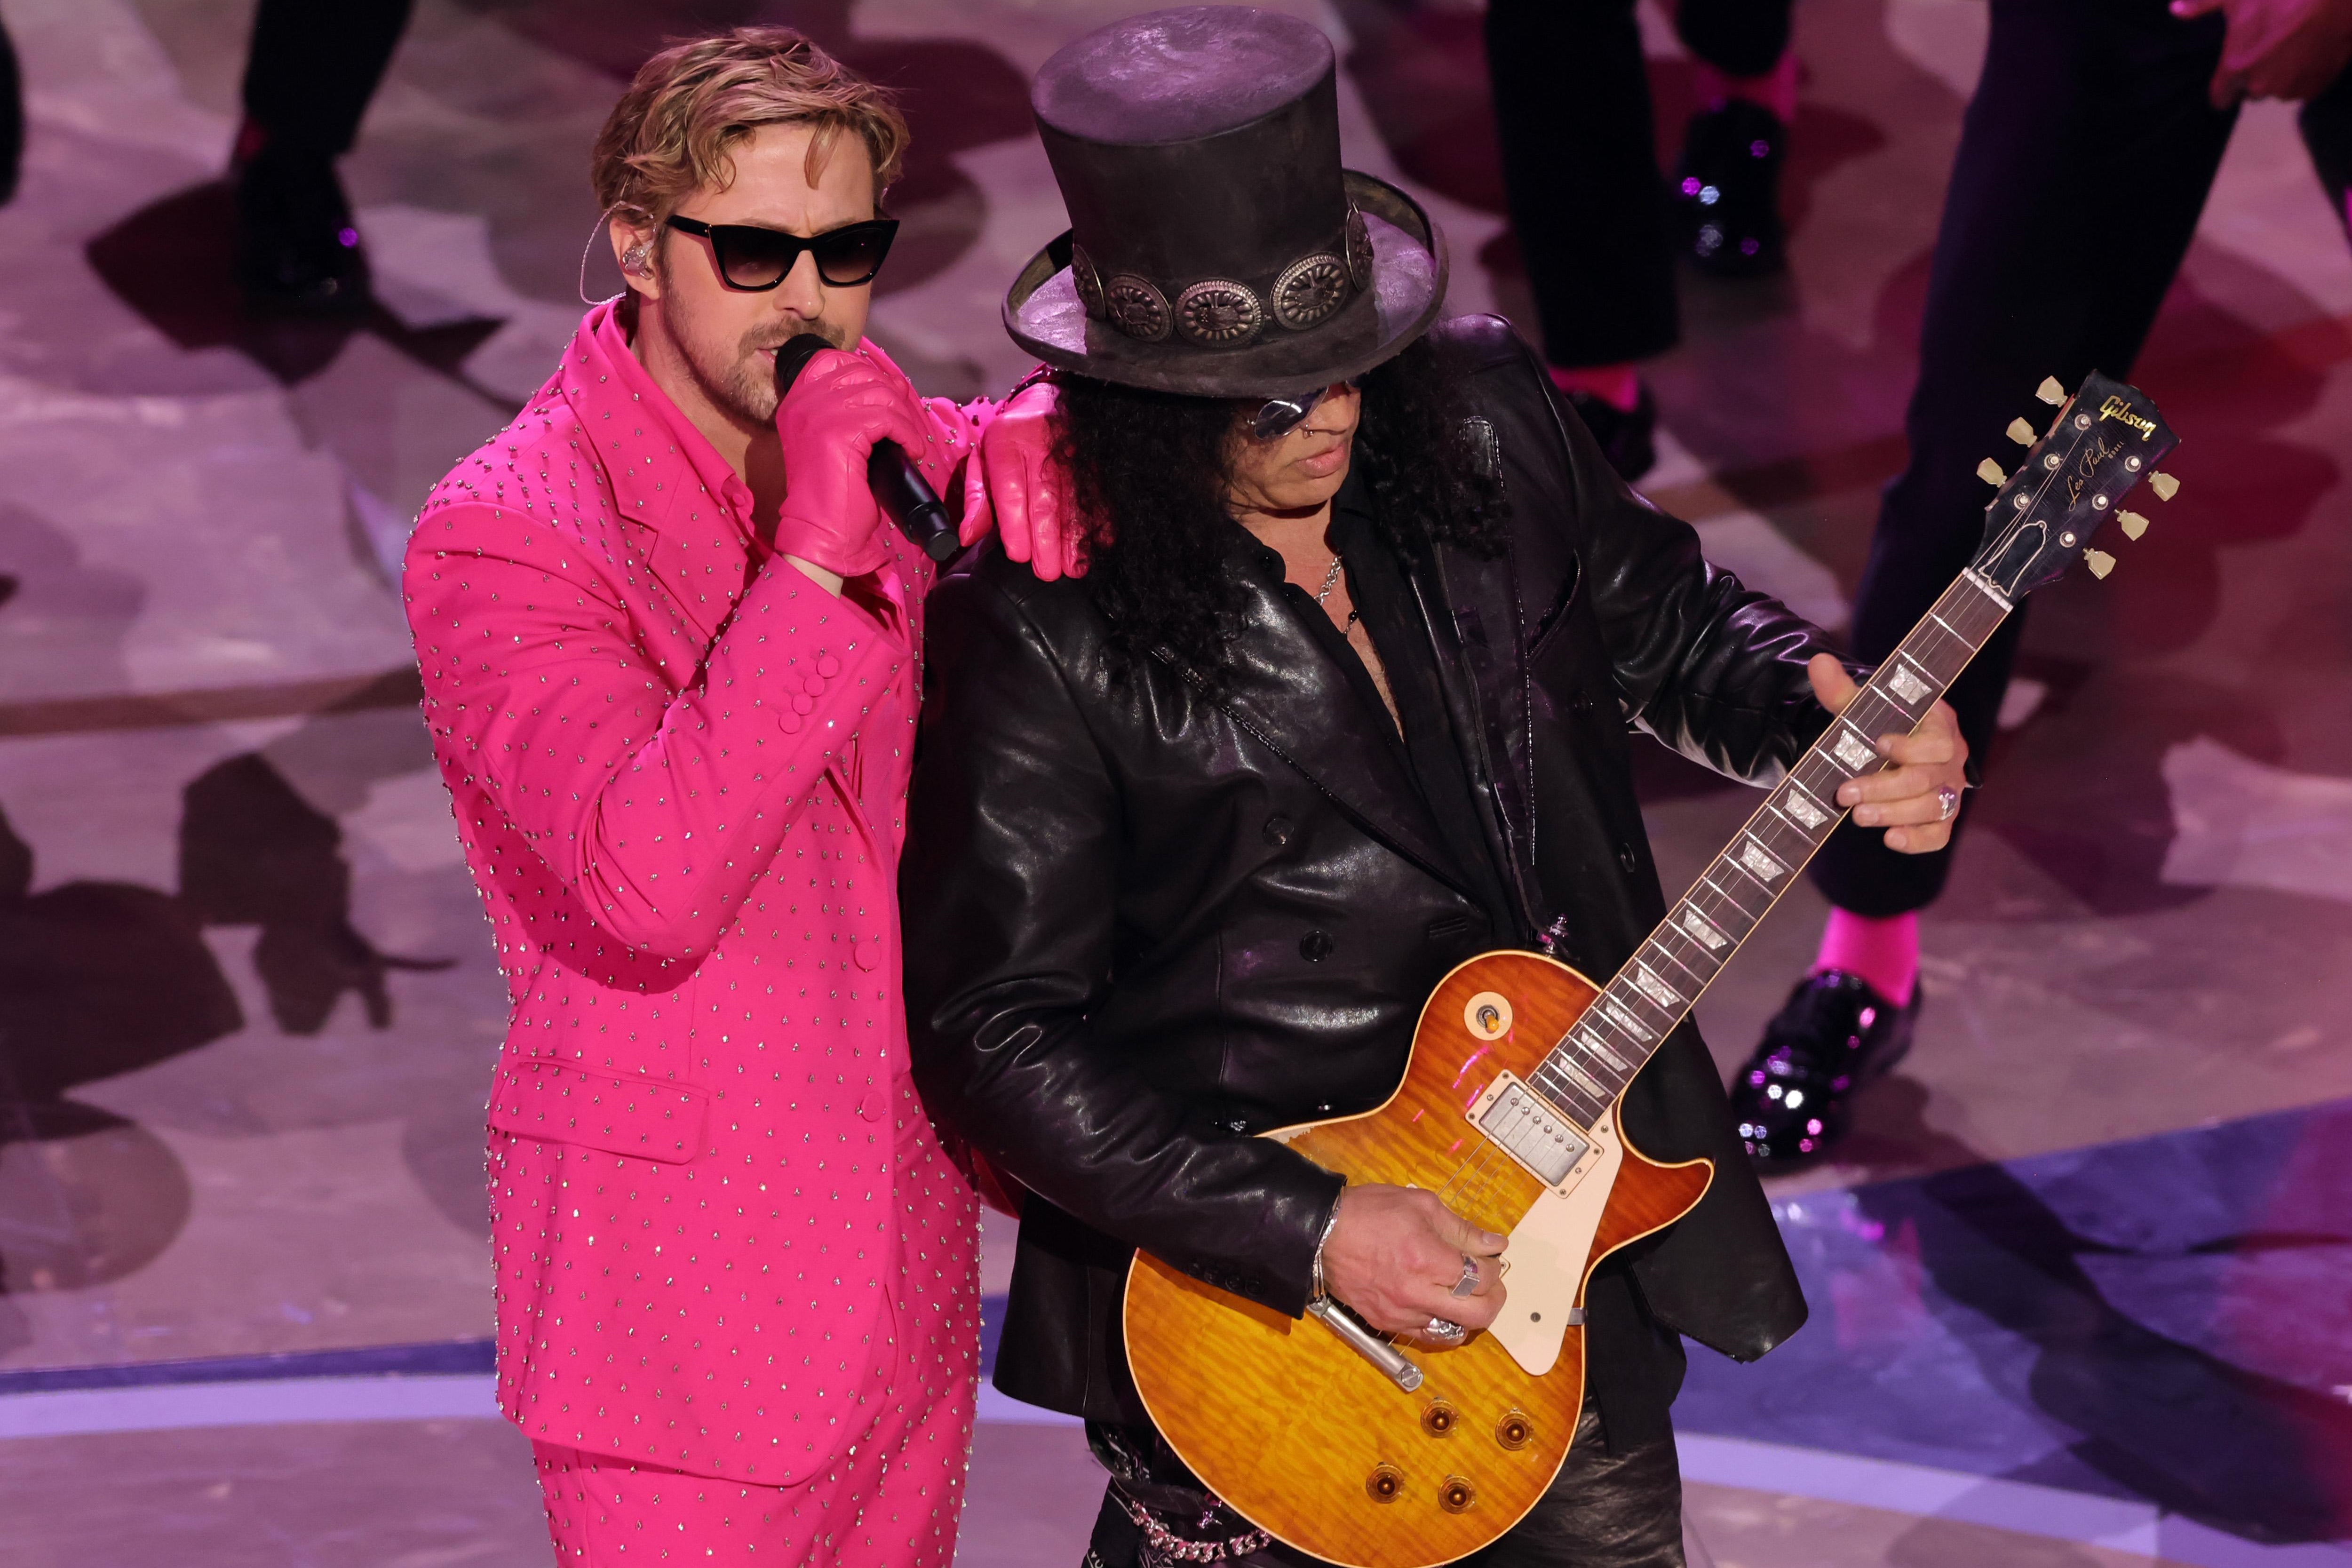 Ryan Gosling’s “I’m Just Ken” Performance” Was Somehow Even Better Than Expected Nadira Goffe